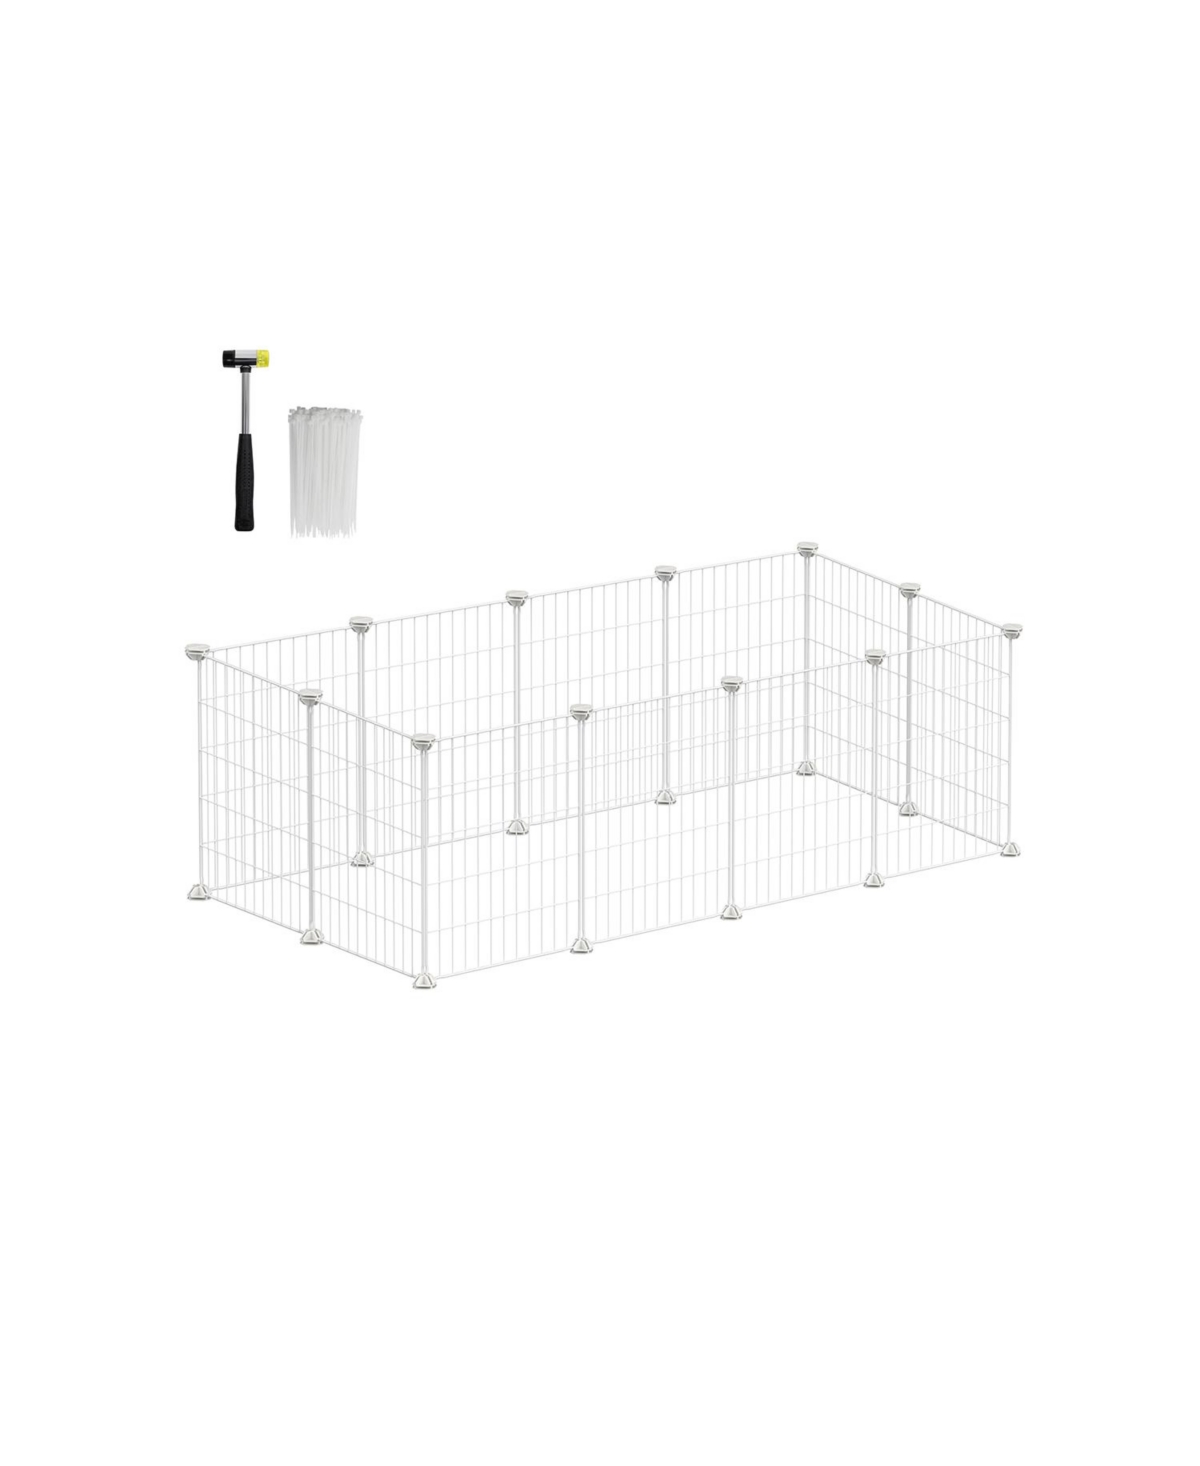 Pet Playpen, Small Animal Cage, Pet Fence with Cable Ties, Diy Metal Enclosure - White